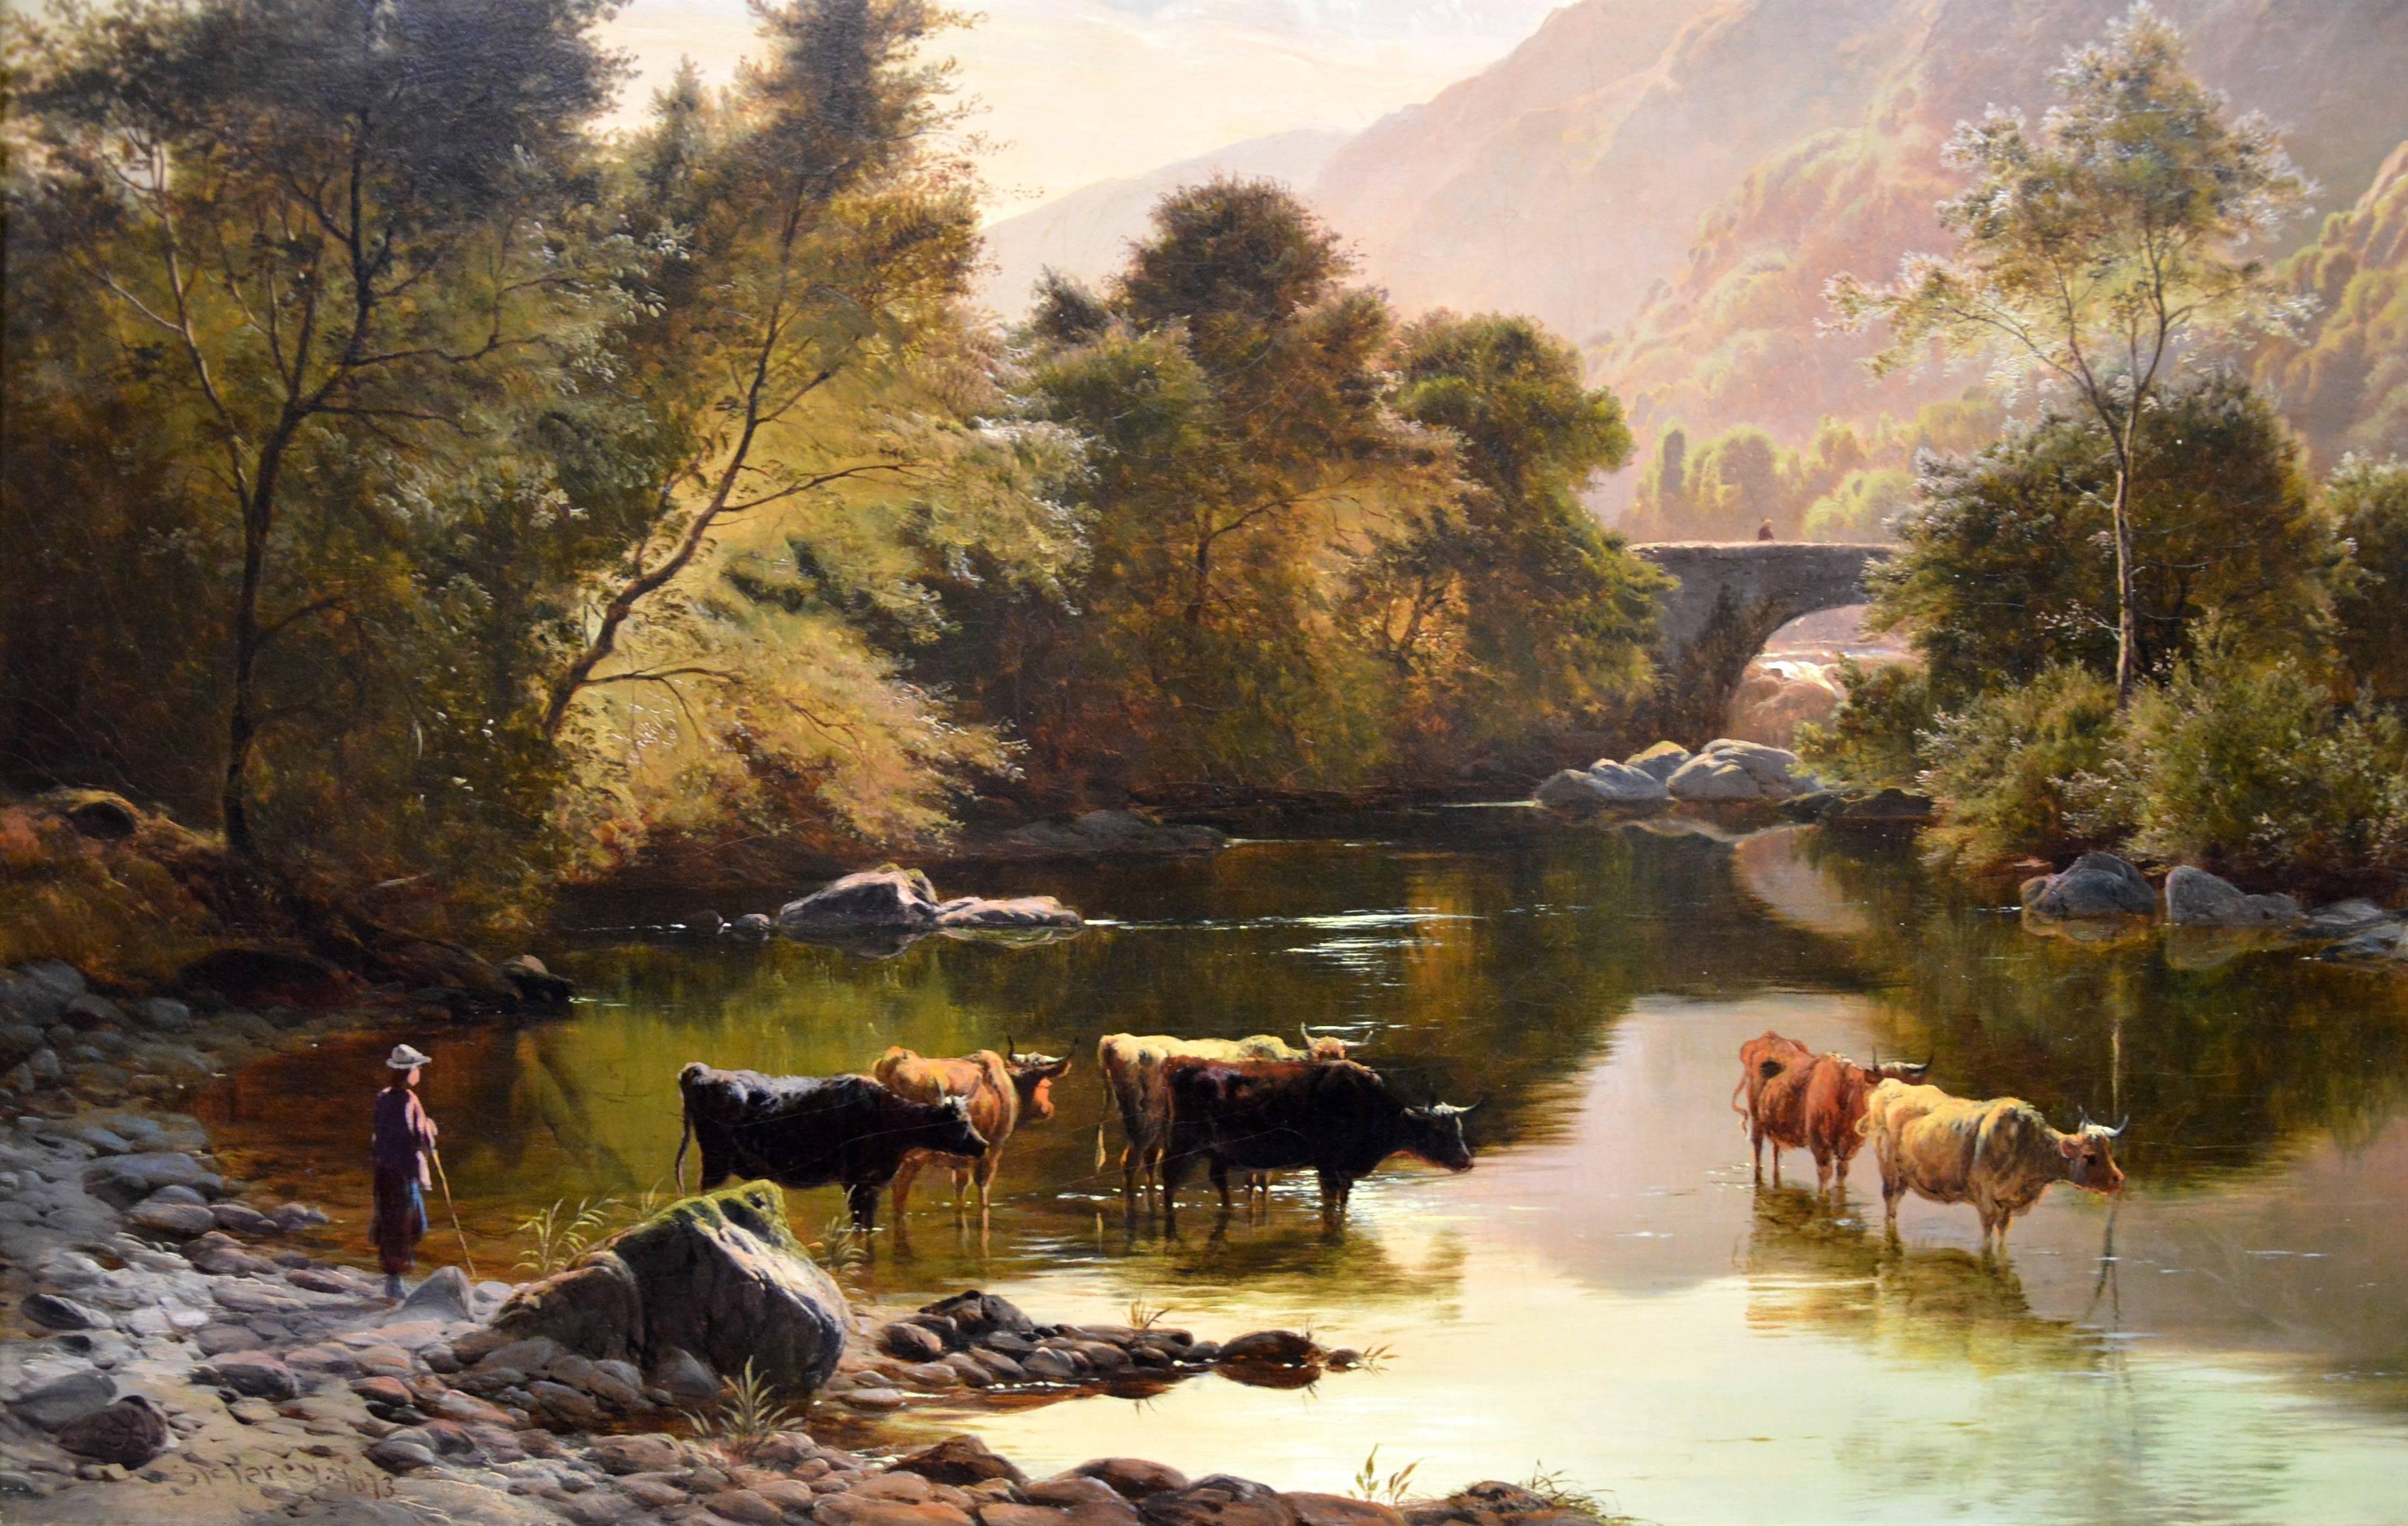 Betws-y-Coed, North Wales - Large 19th Century Oil Painting Sidney Richard Percy 4